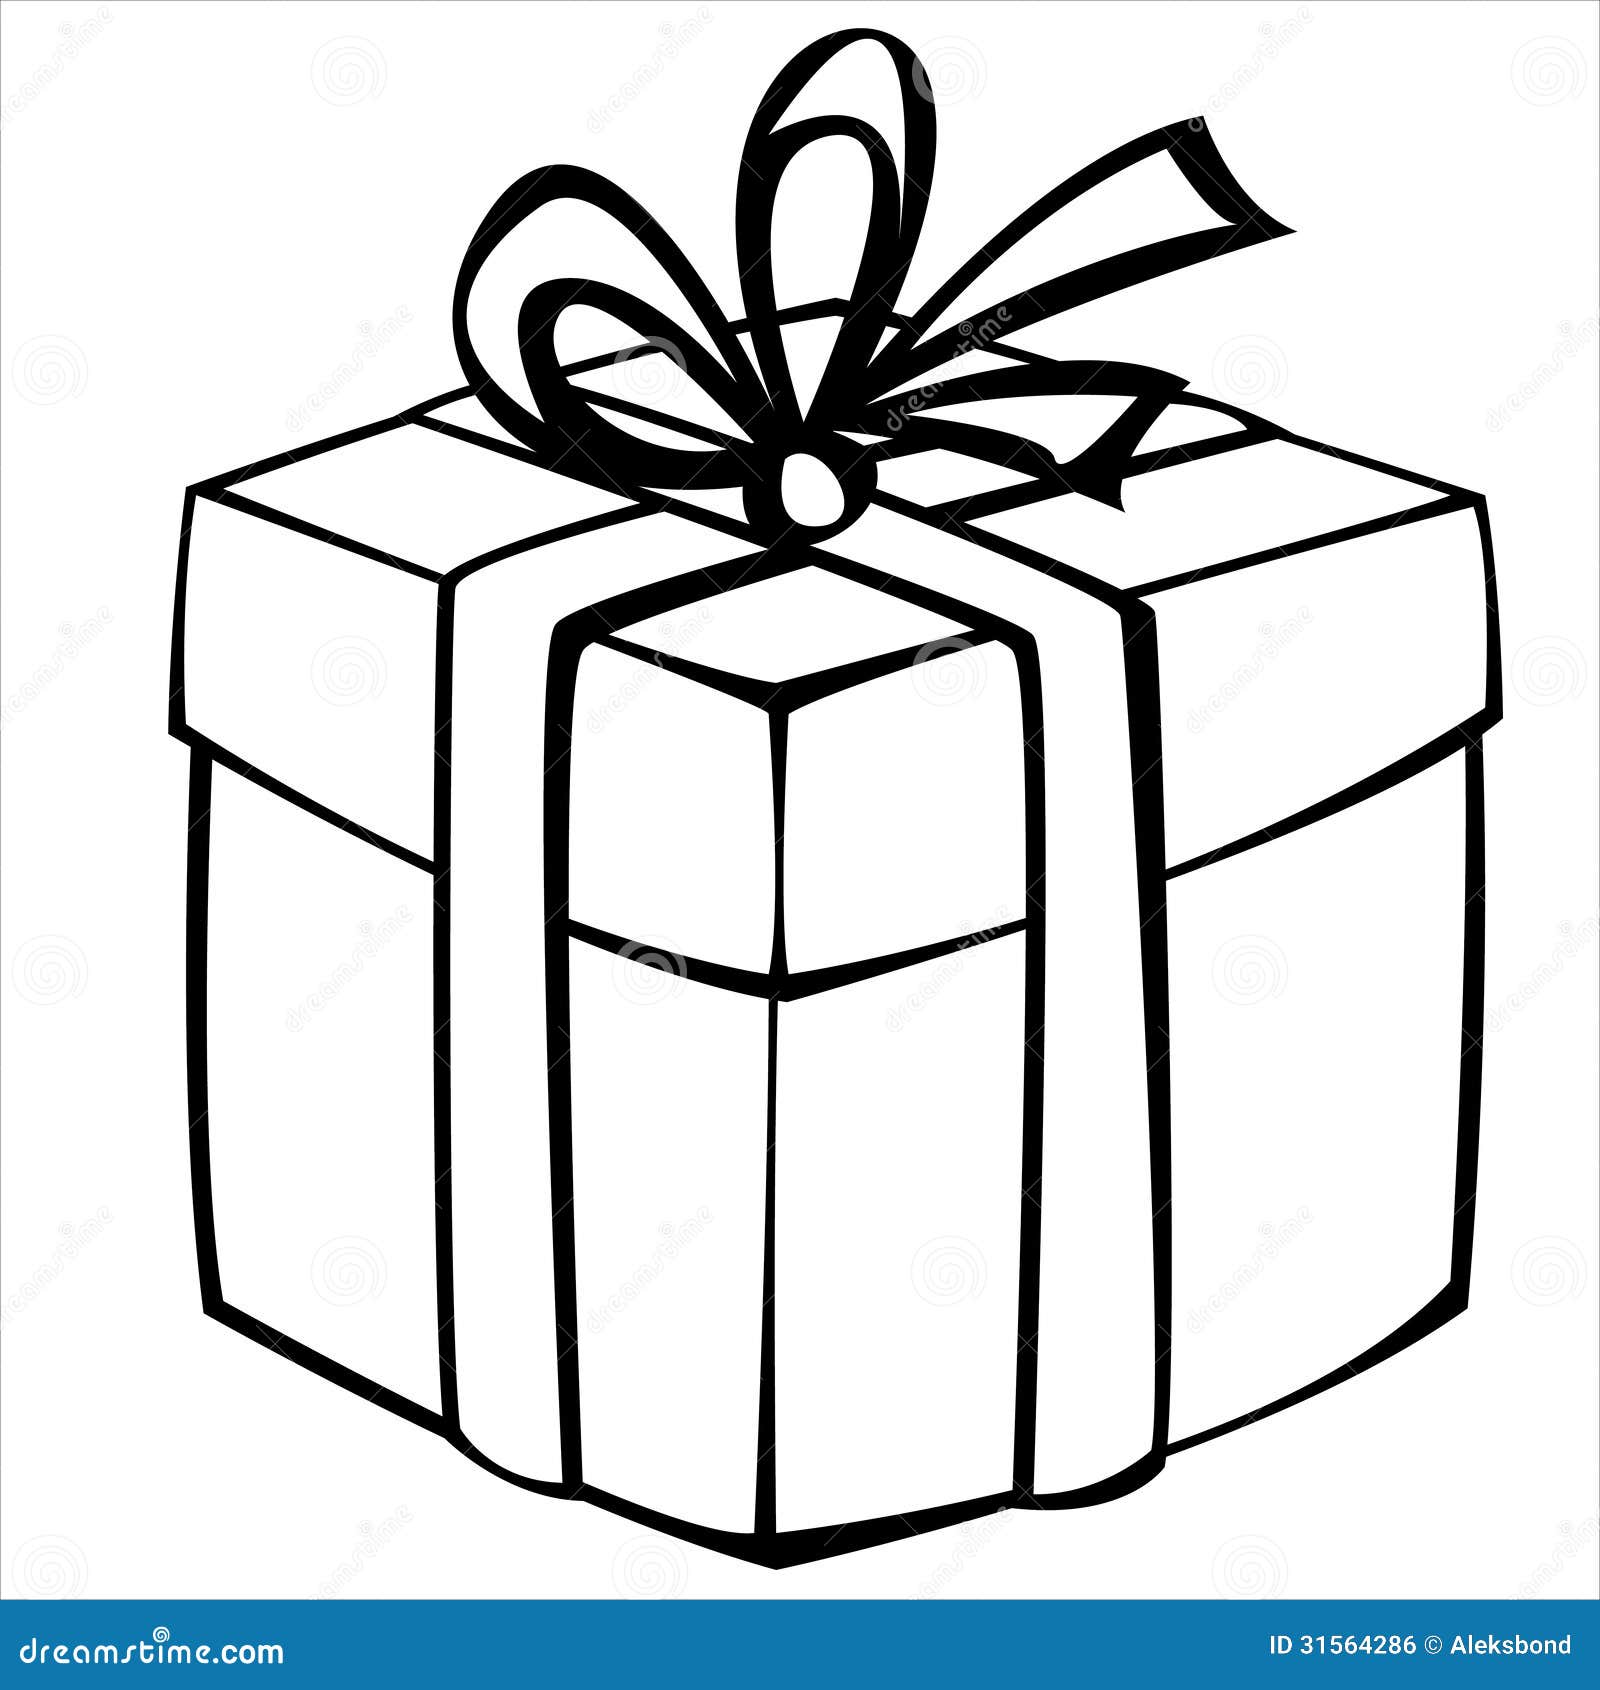 gift clipart black and white free - photo #36